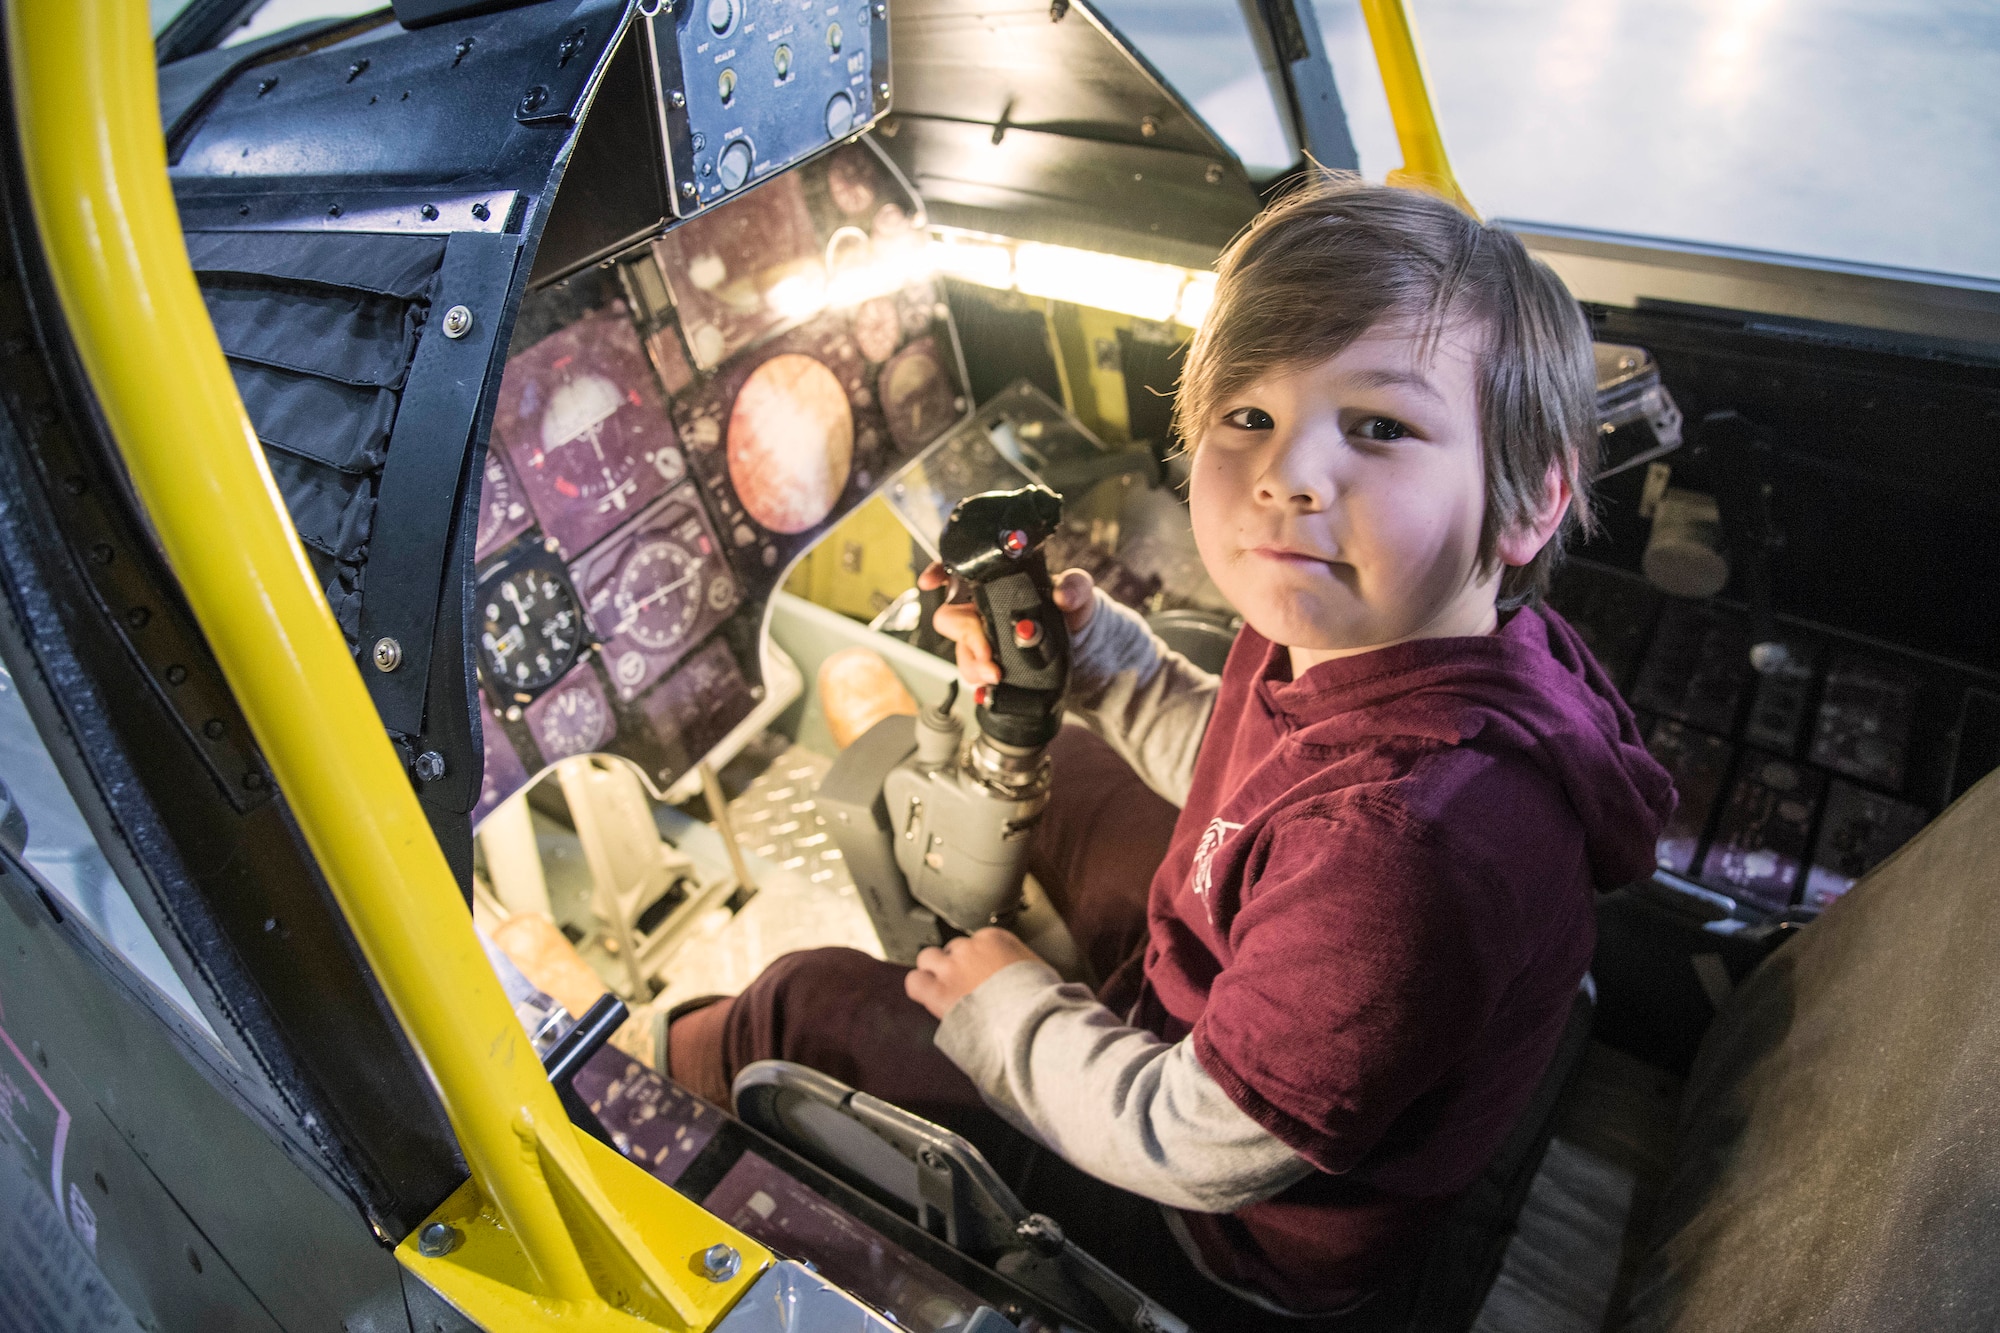 DAYTON, Ohio - A museum visitor enjoying the A-7D Sit-in Cockpit in the Cold War Gallery at the National Museum of the U.S. Air Force. (U.S. Air Force photo)